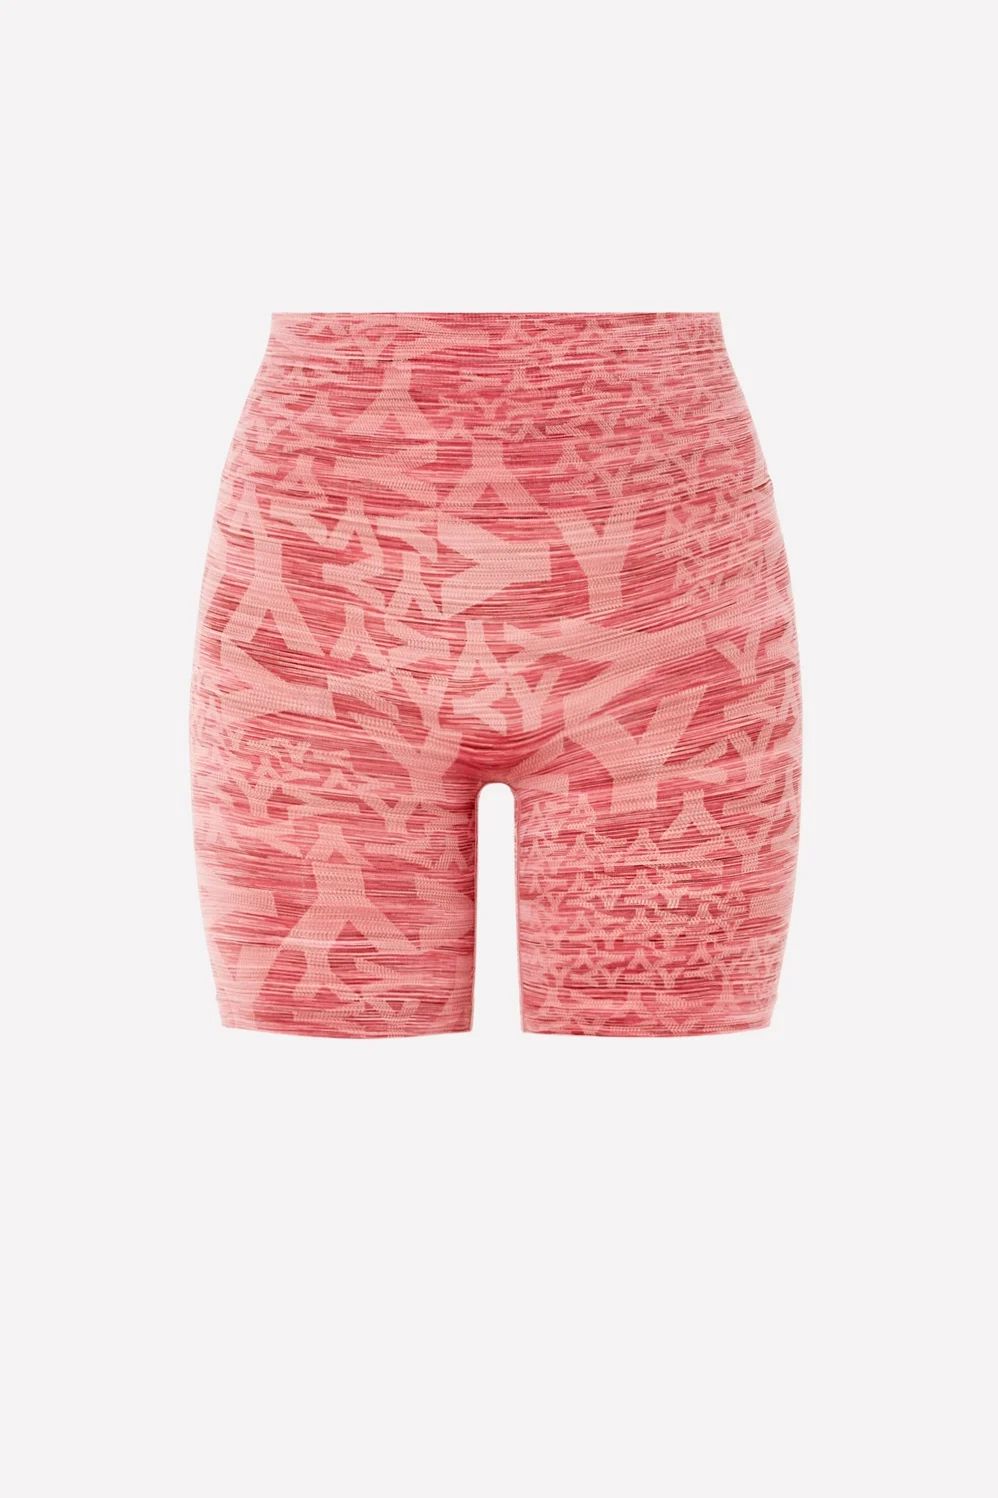 Nearly Naked Shaping High Waist Jacquard Short | Fabletics - North America